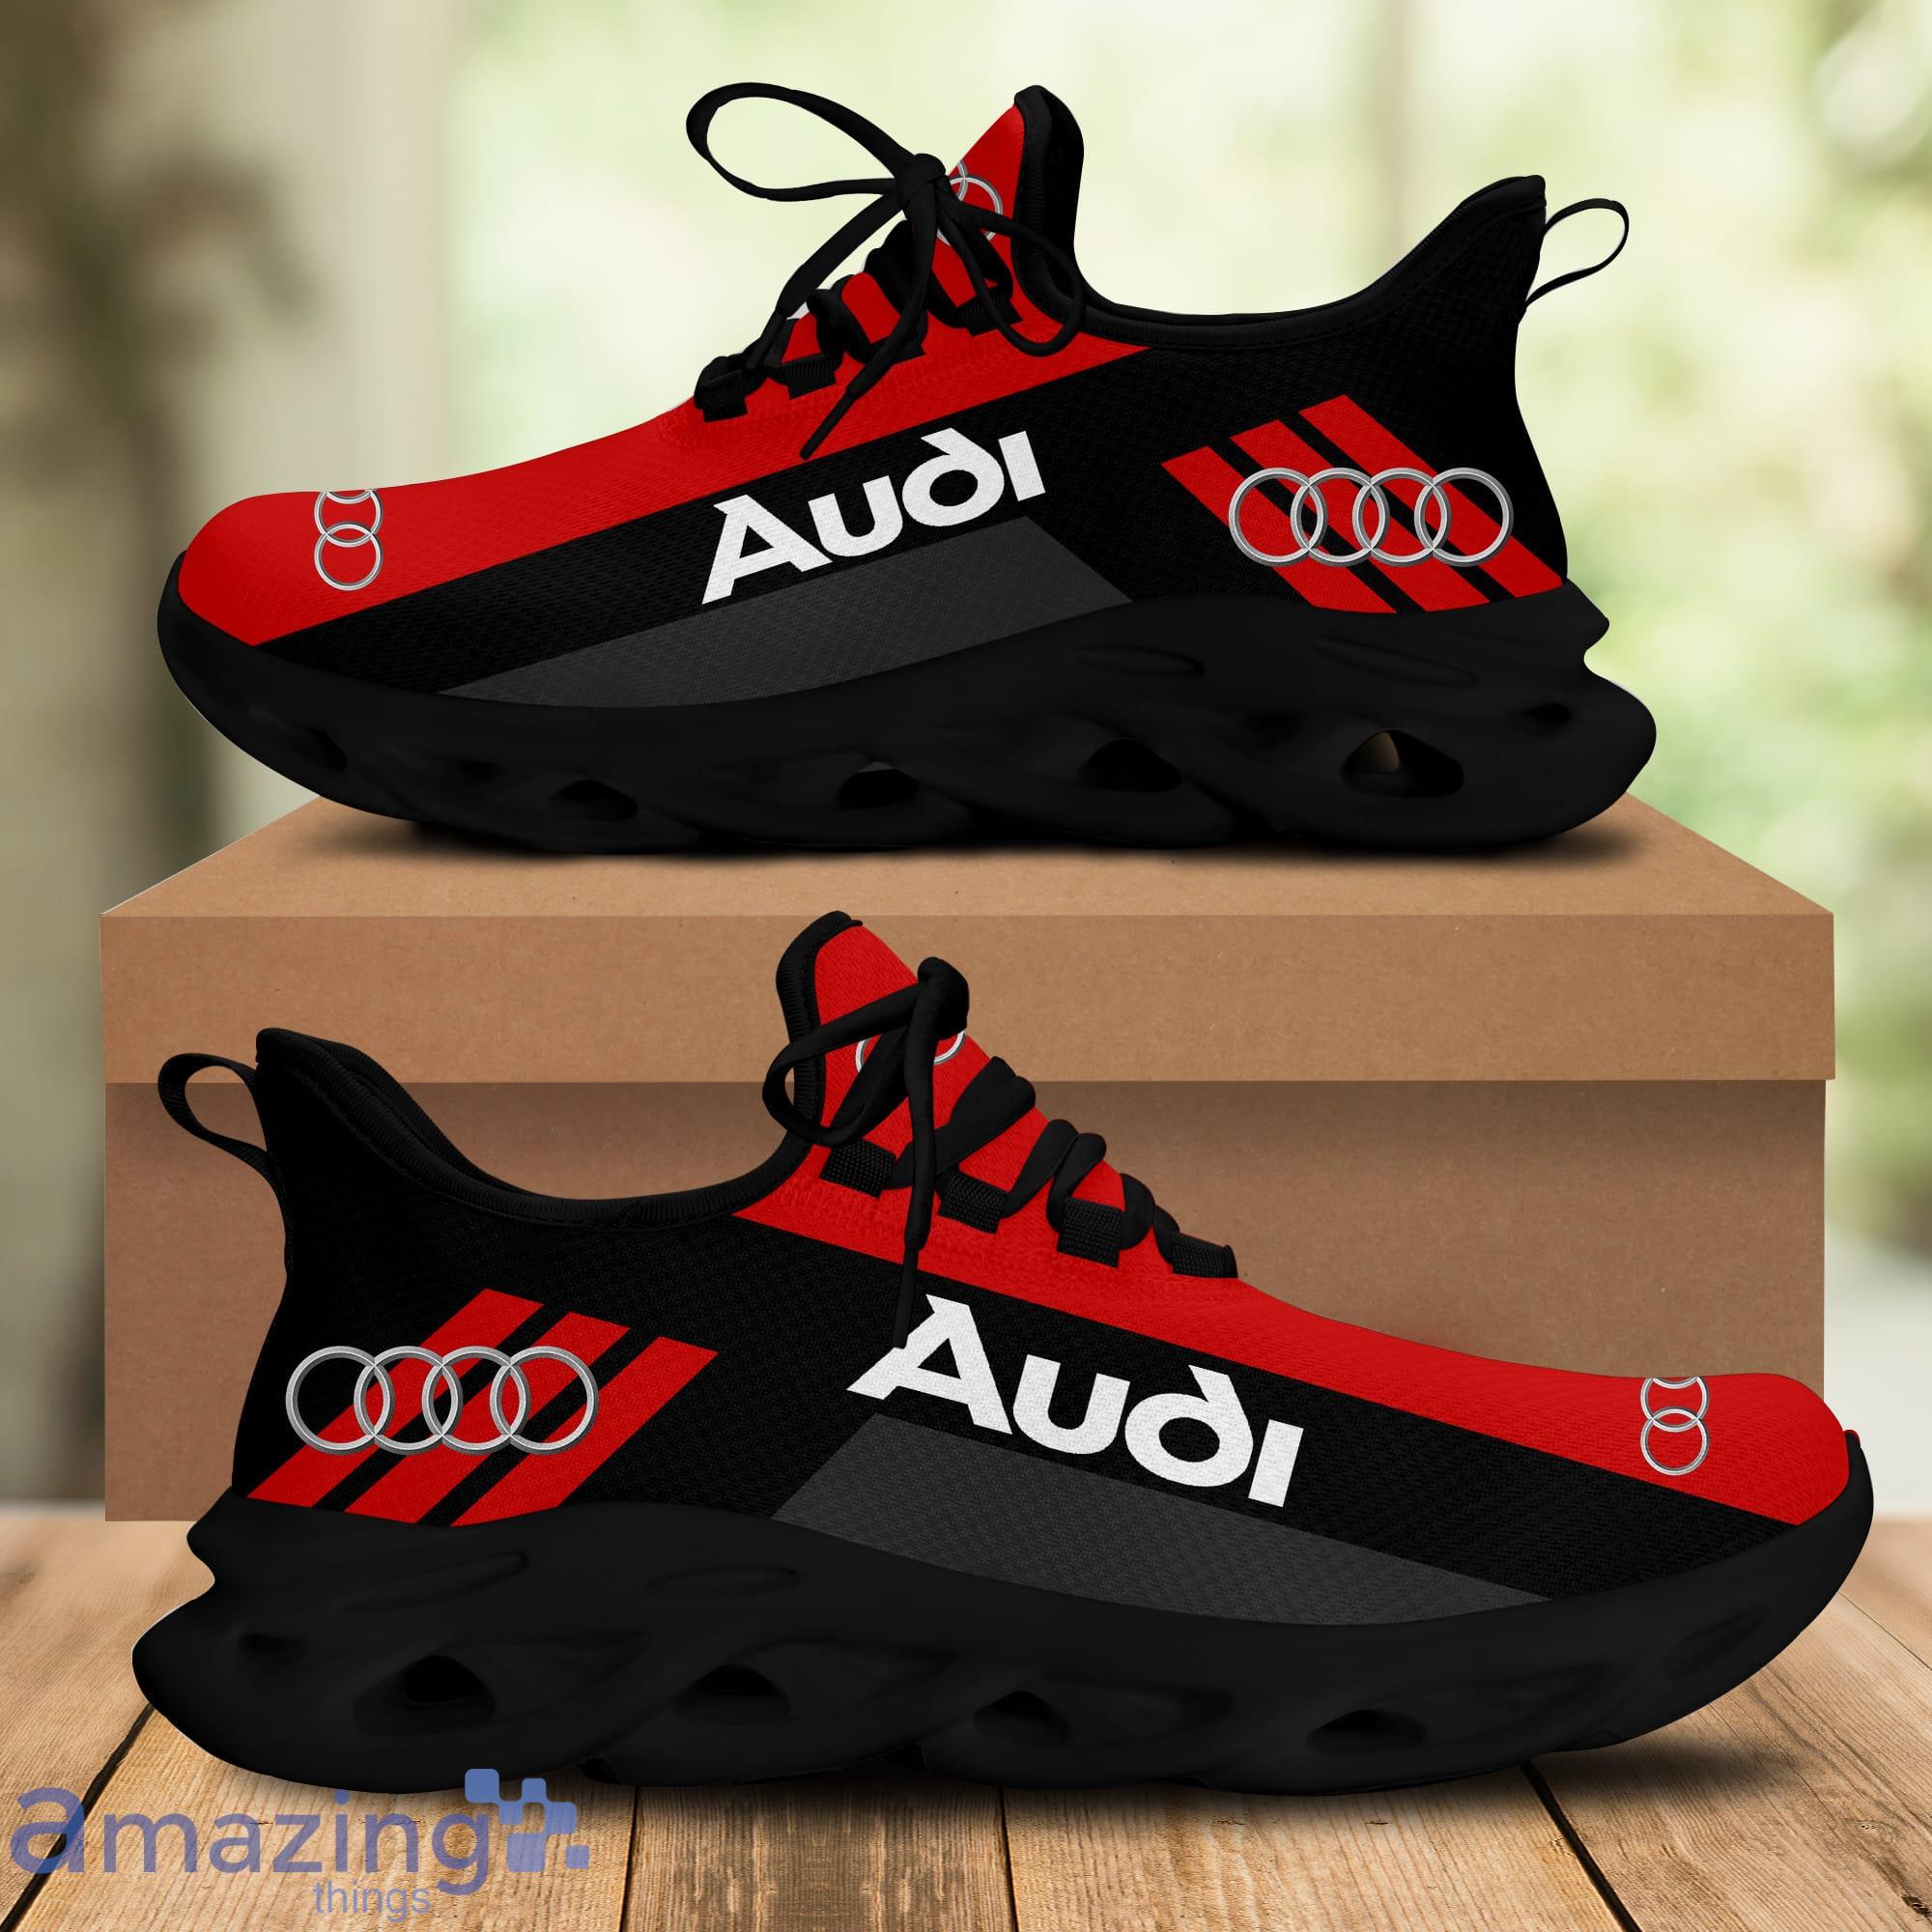 Audi Lovers - ♦️AUDl – NEW FASHION MEN'S SHOES♦️ 🌍Free shipping Worldwide  + 50% OFF 👉Order here⏩